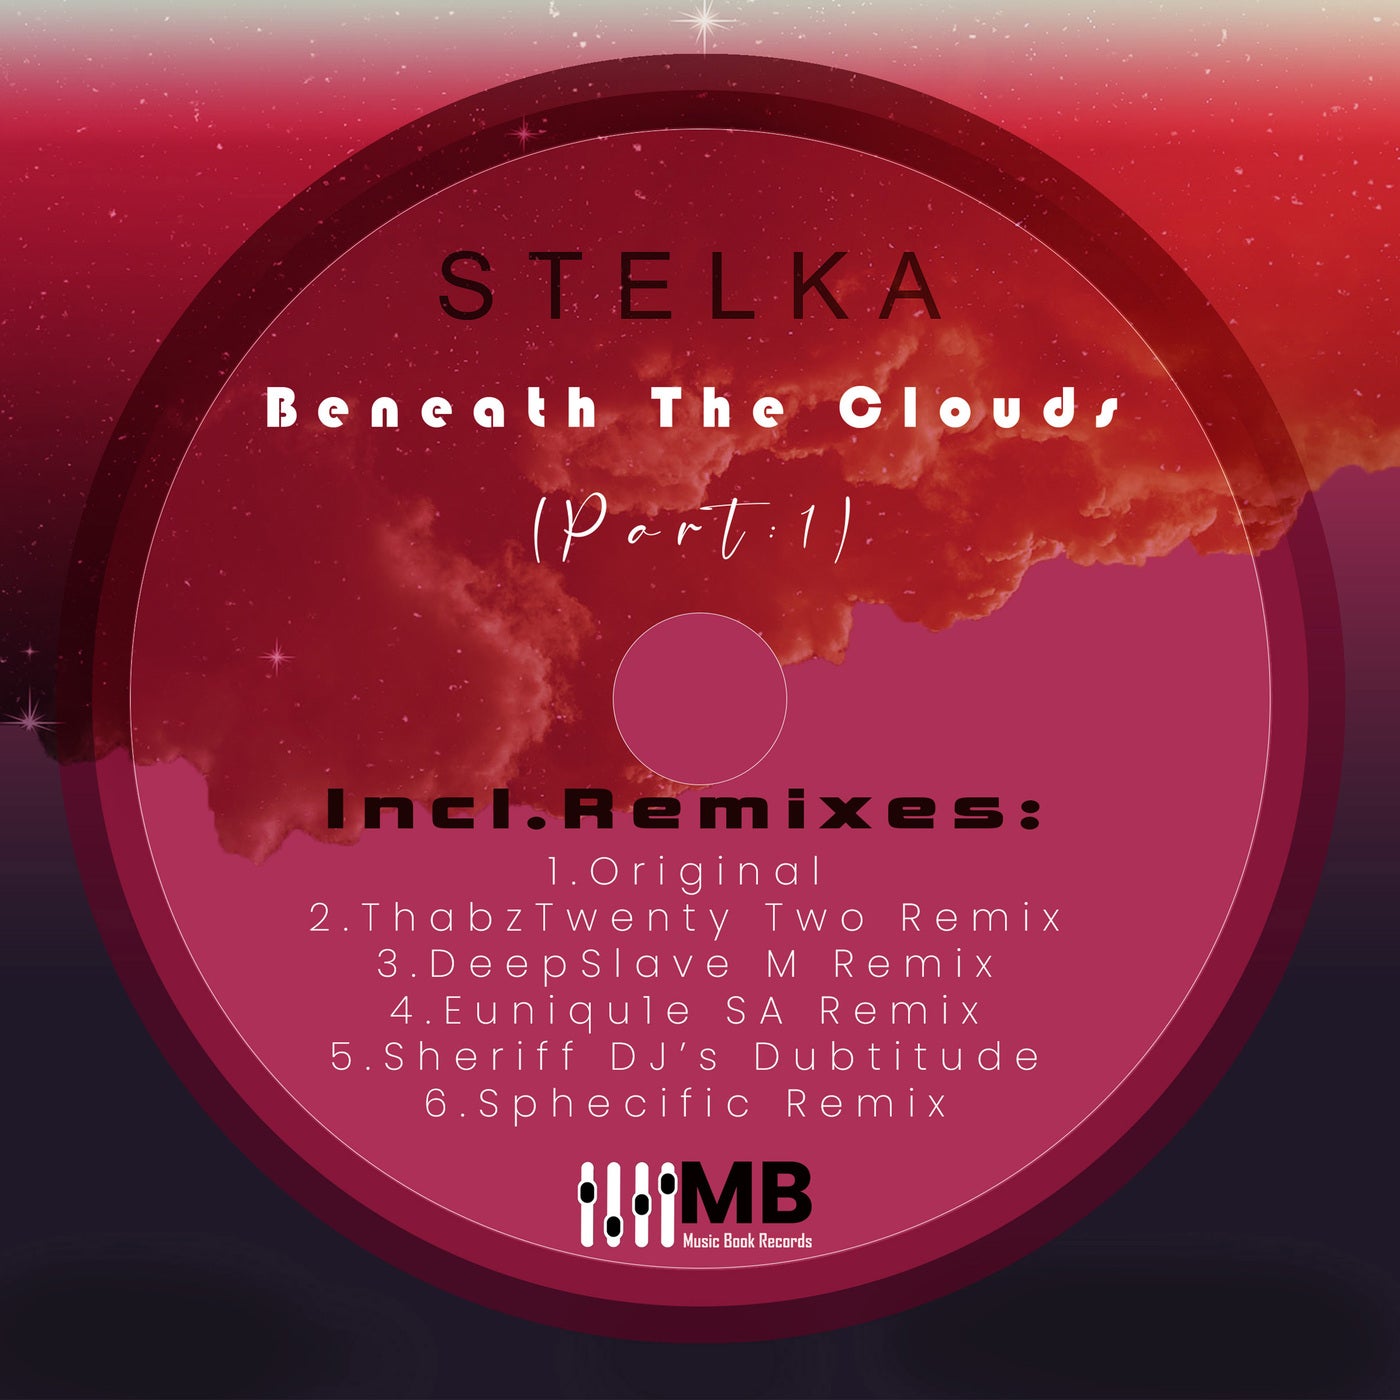 Stelka - Beneath the Clouds Remixes, Pt. 1 [Music Book Records]